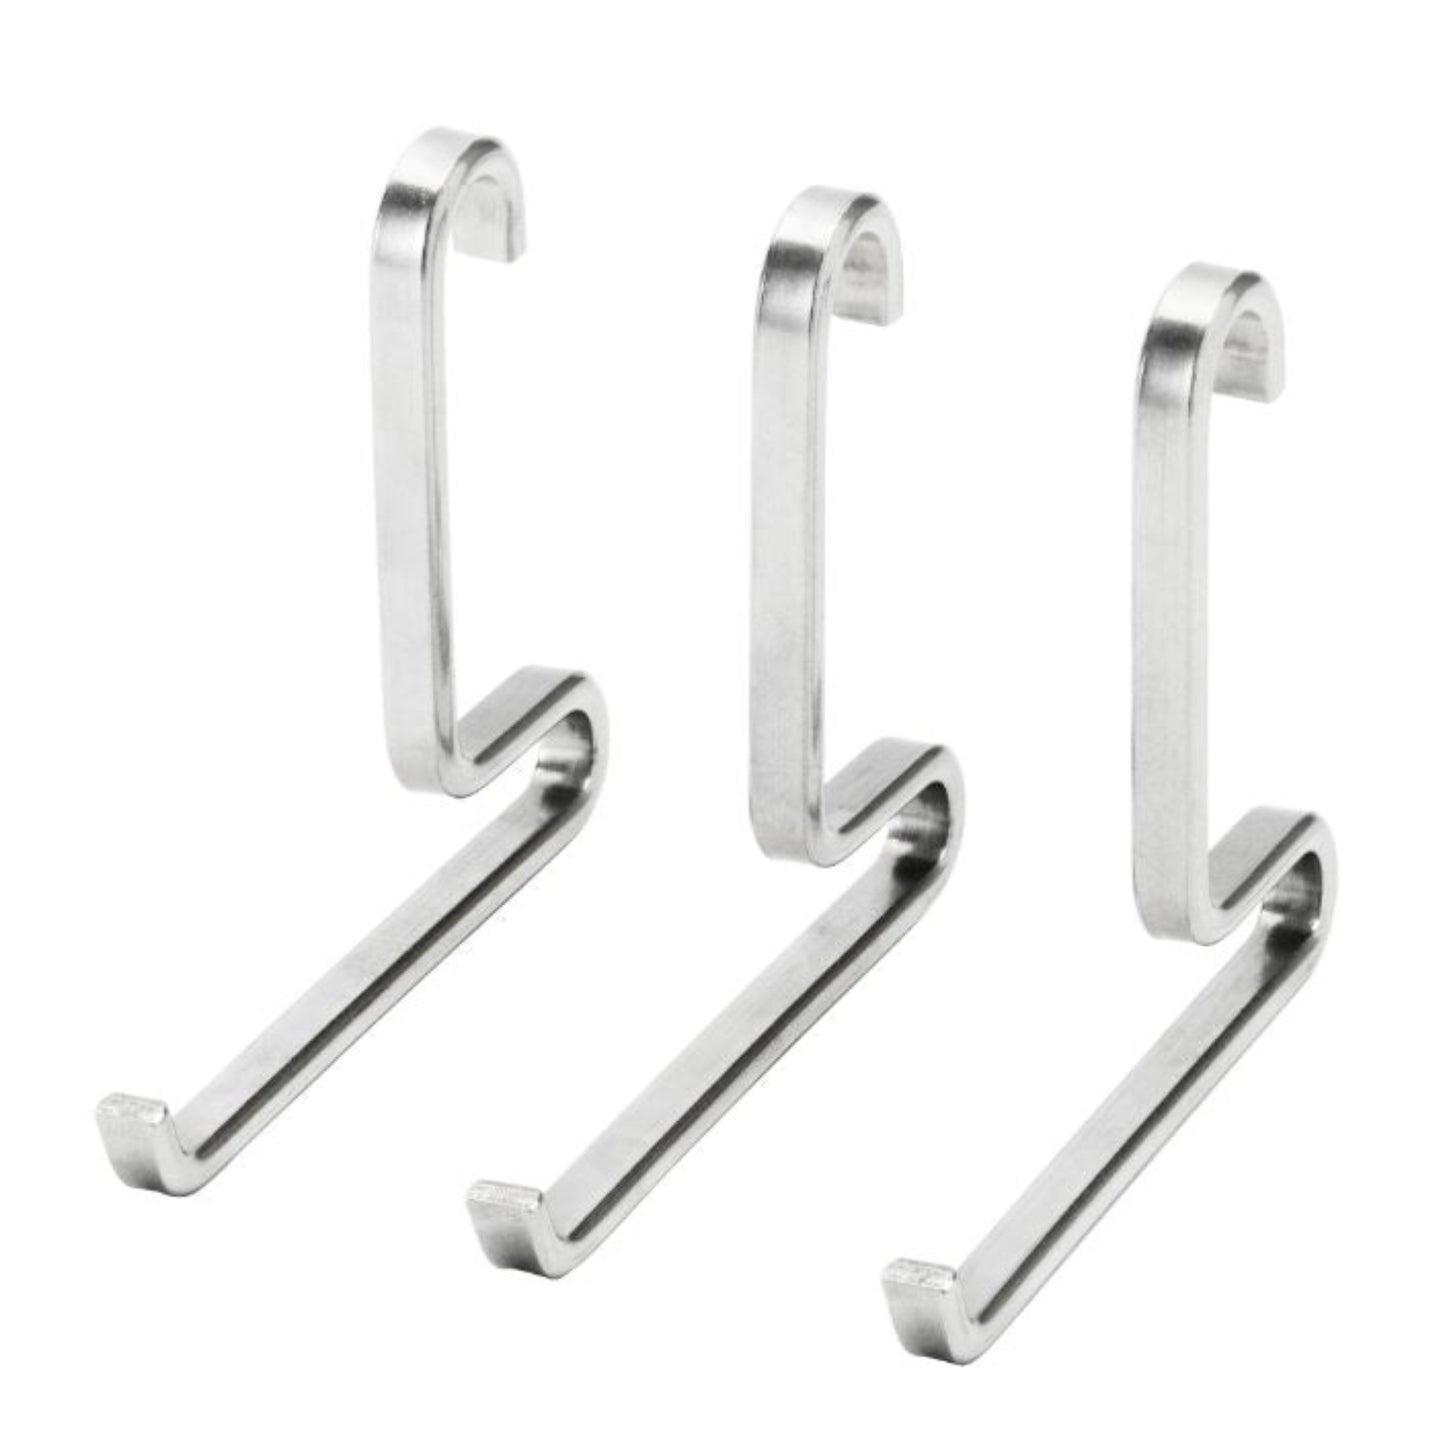 IKEA Kungsfors S/S Long Hook 3-Pack (1968545267777)